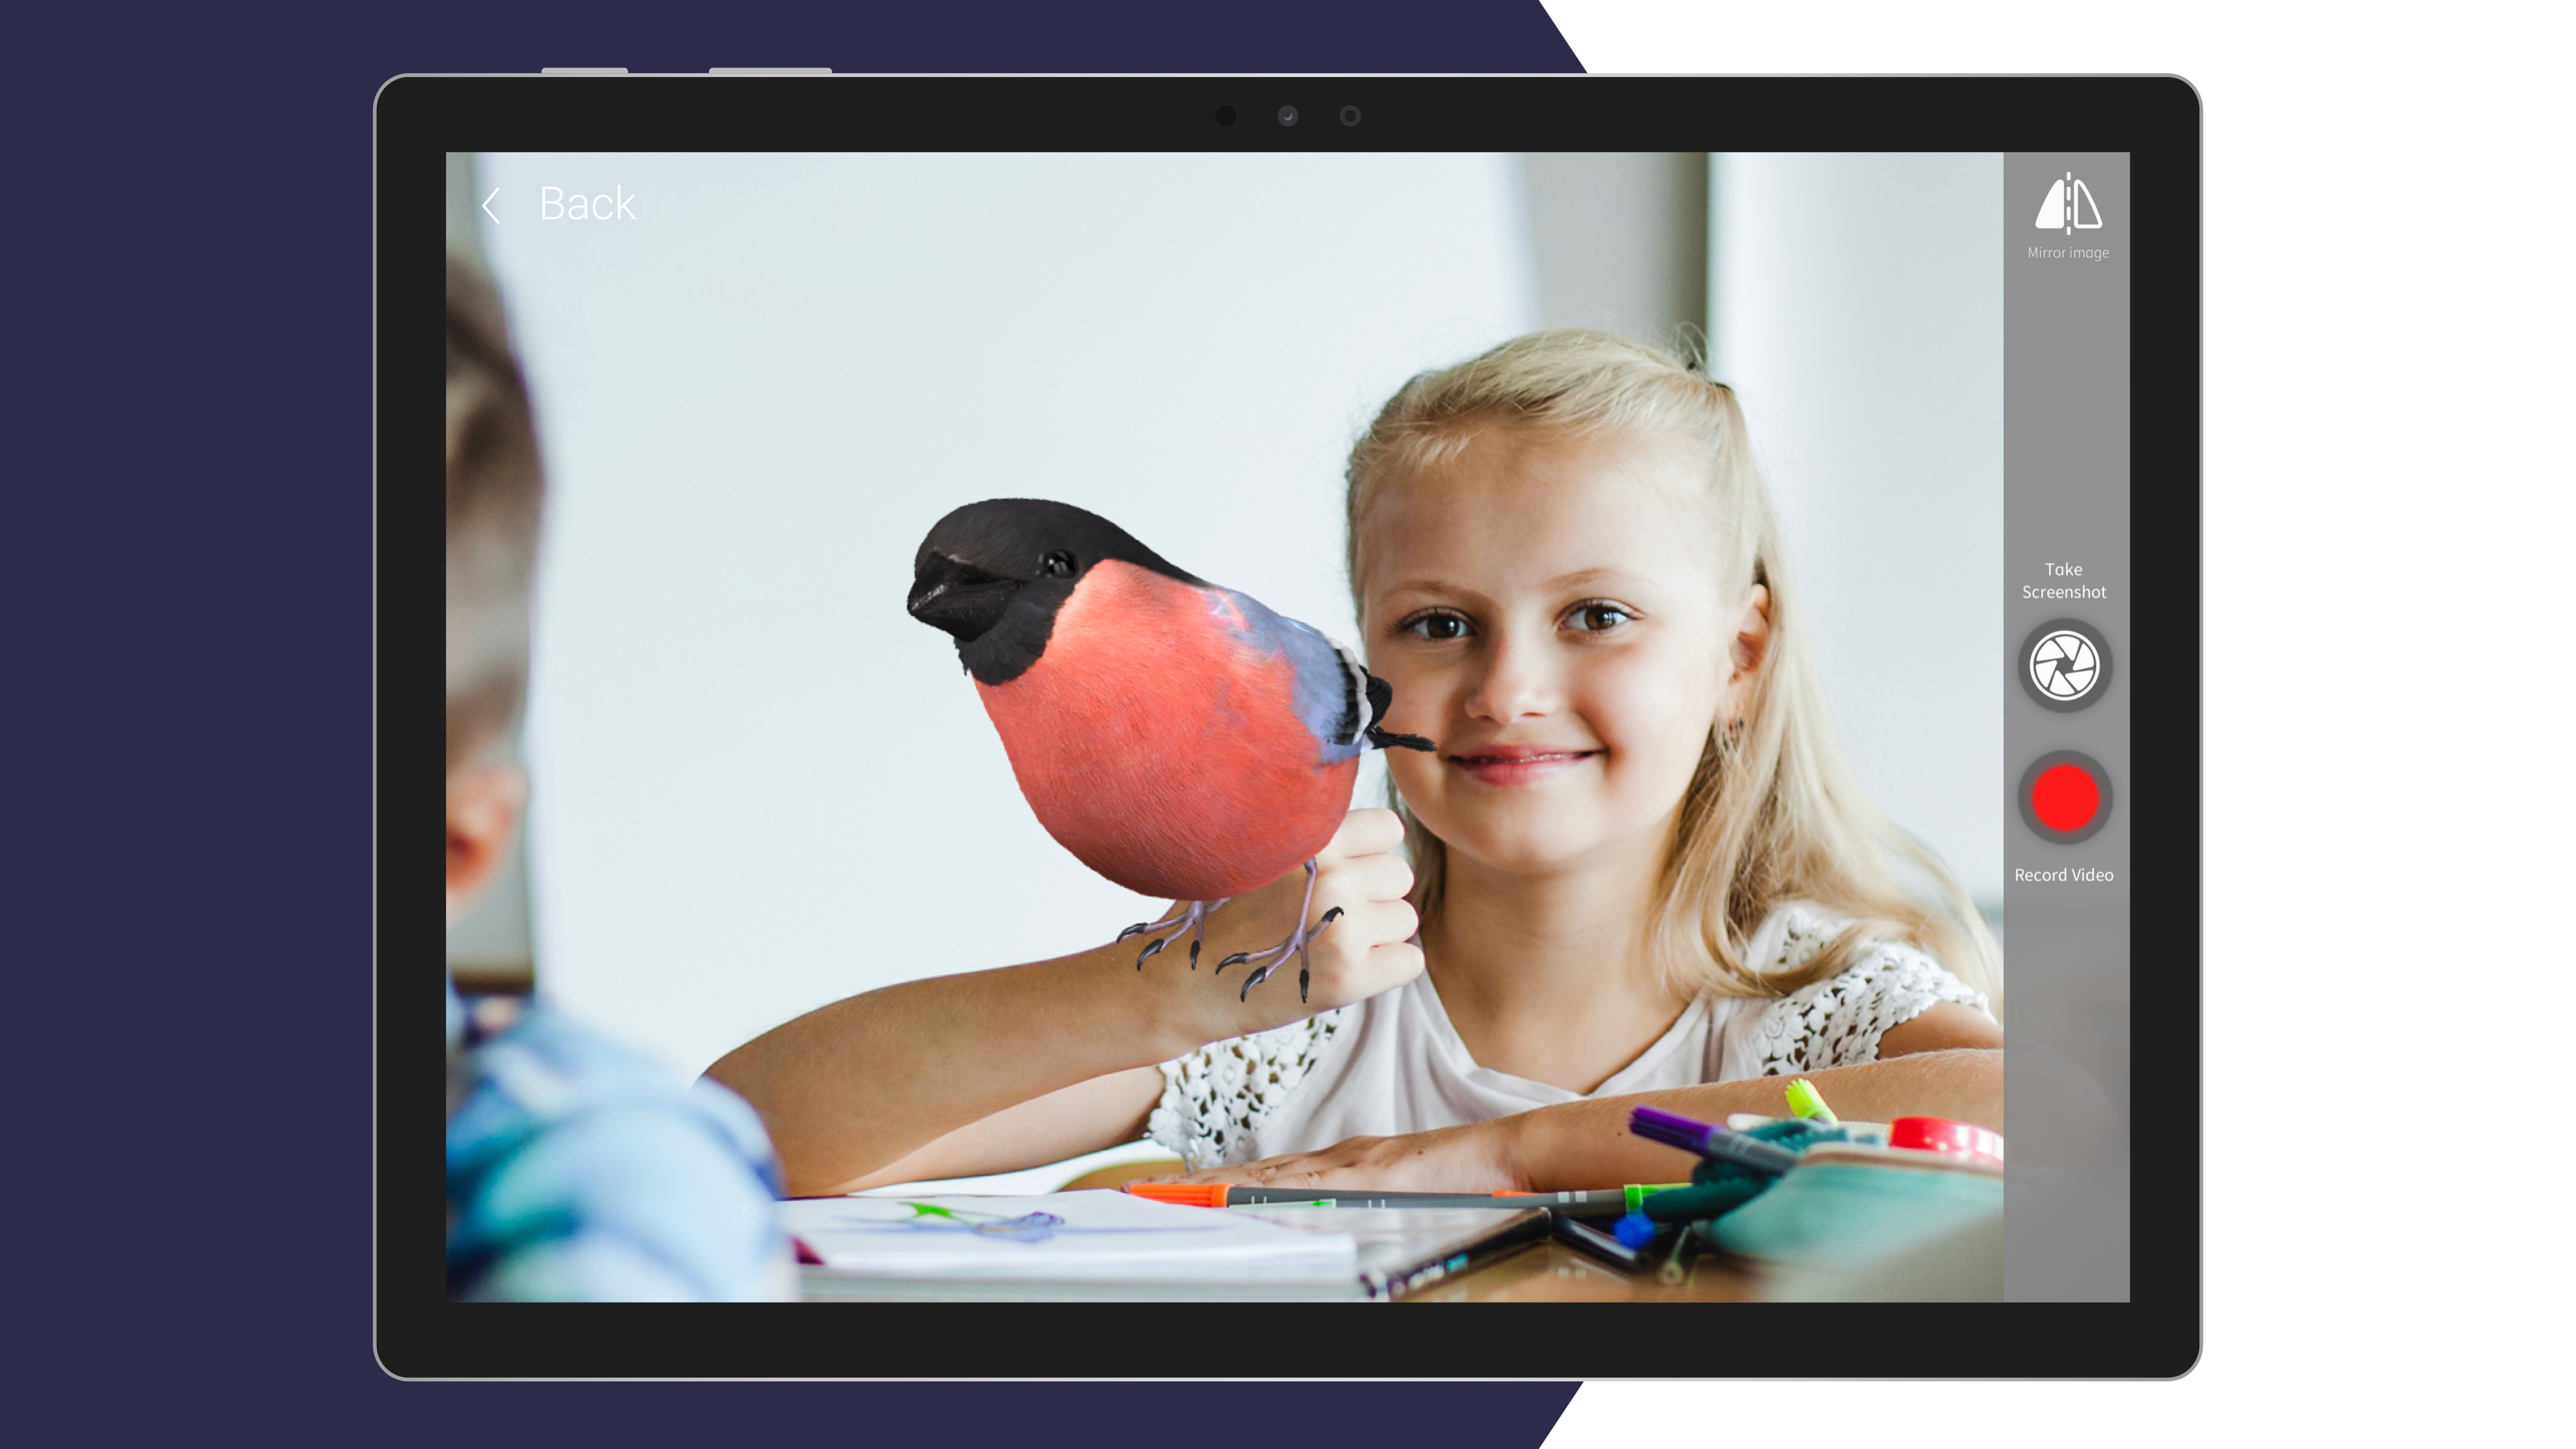 Transfer 3D models to the real world with the augmented reality feature (AR) and implement it as a fun activity into your teaching.